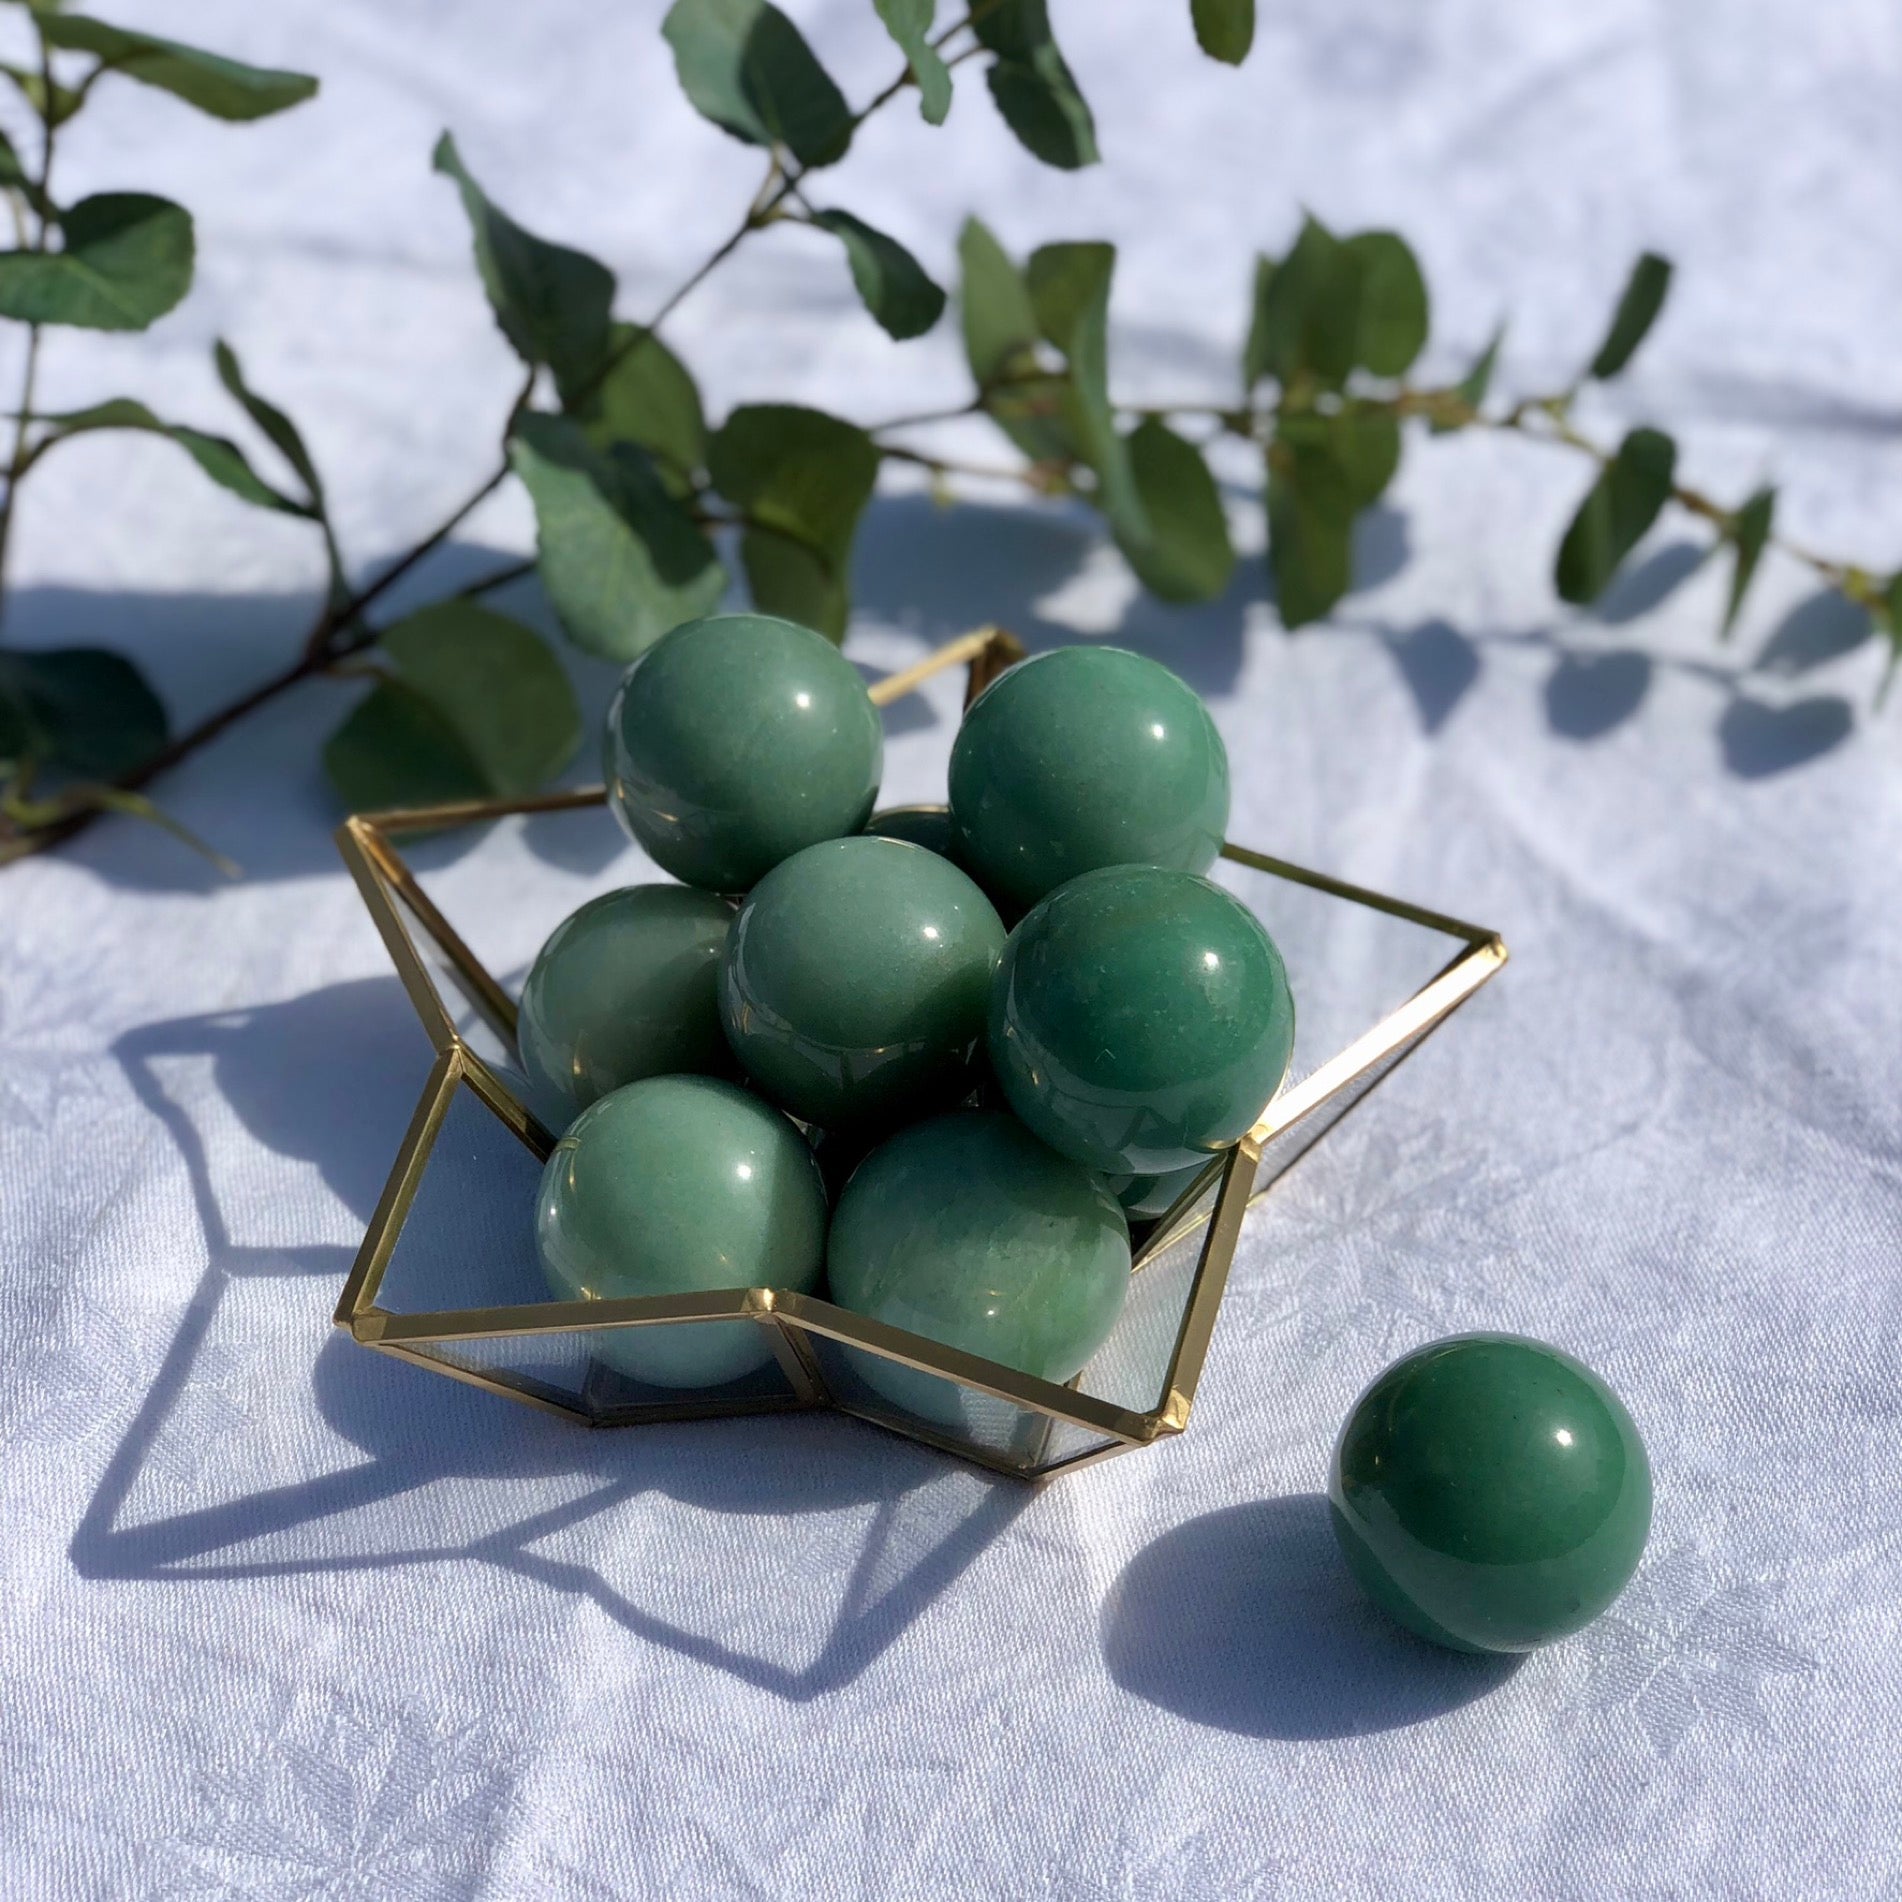 Close up of green aventurine healing crystal spheres for home decor or wellbeing practices